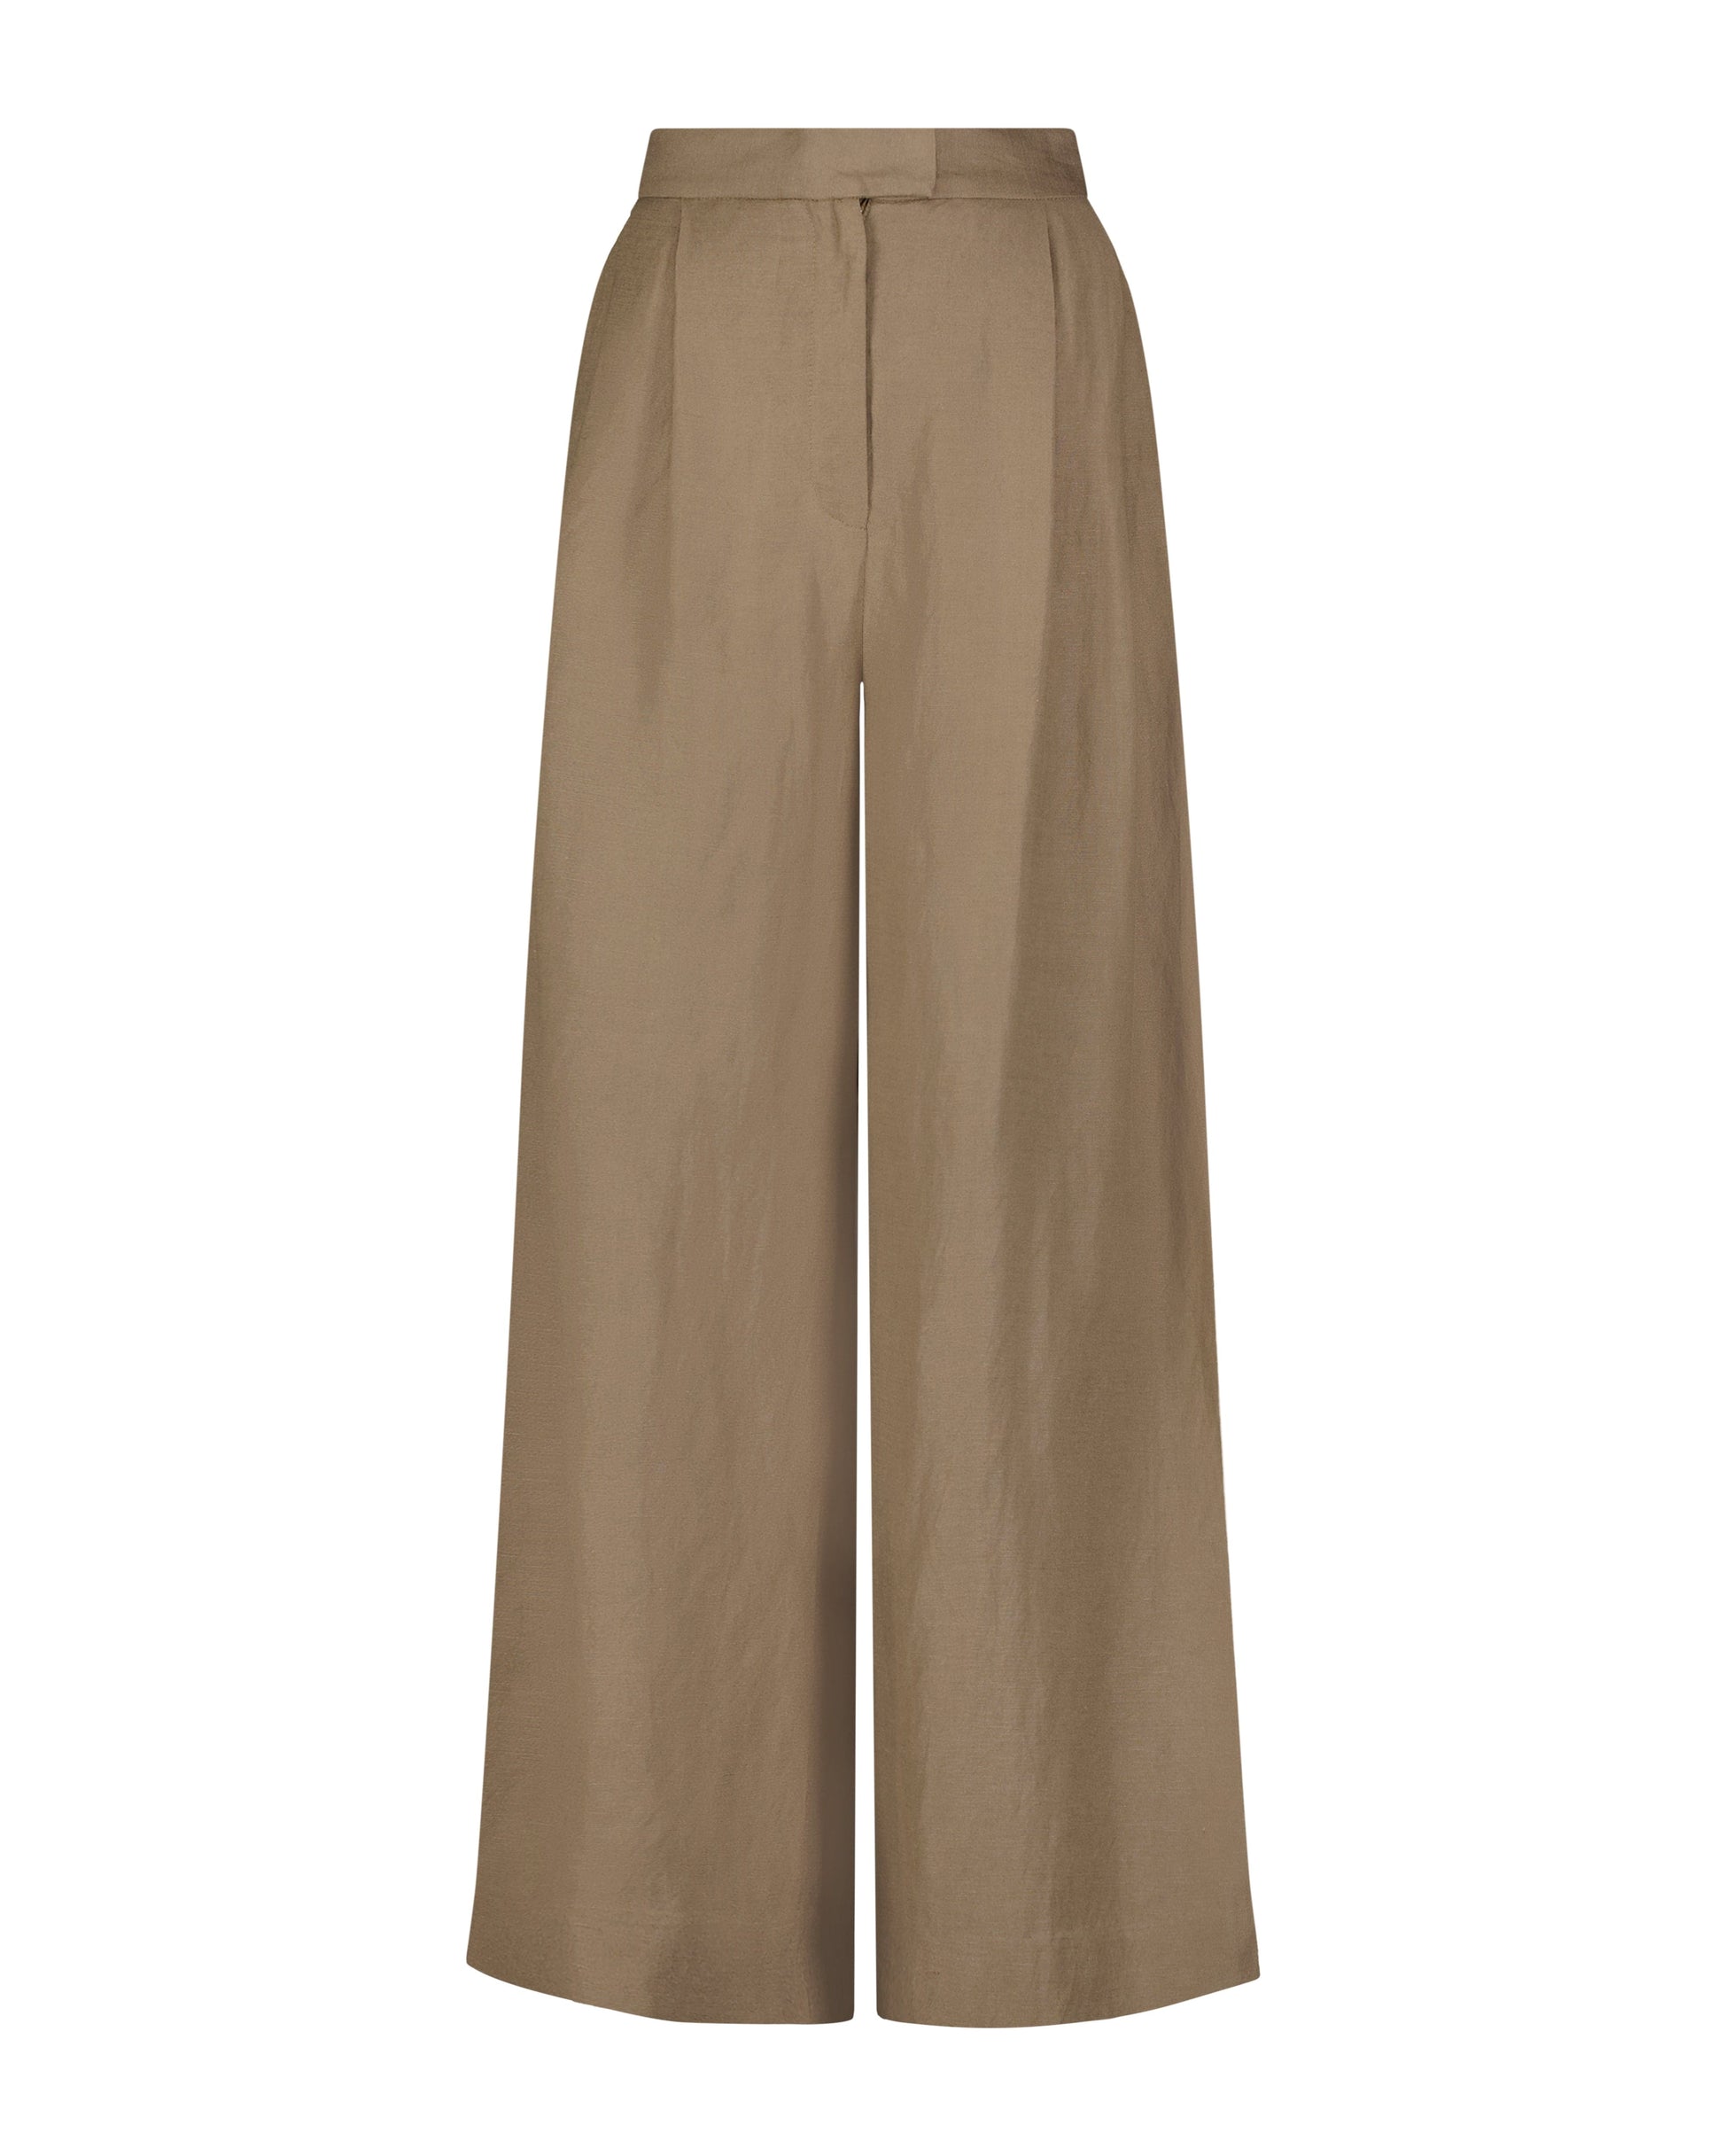 Katherine Pant in Linen Blend Pants CHRISTINE ALCALAY   